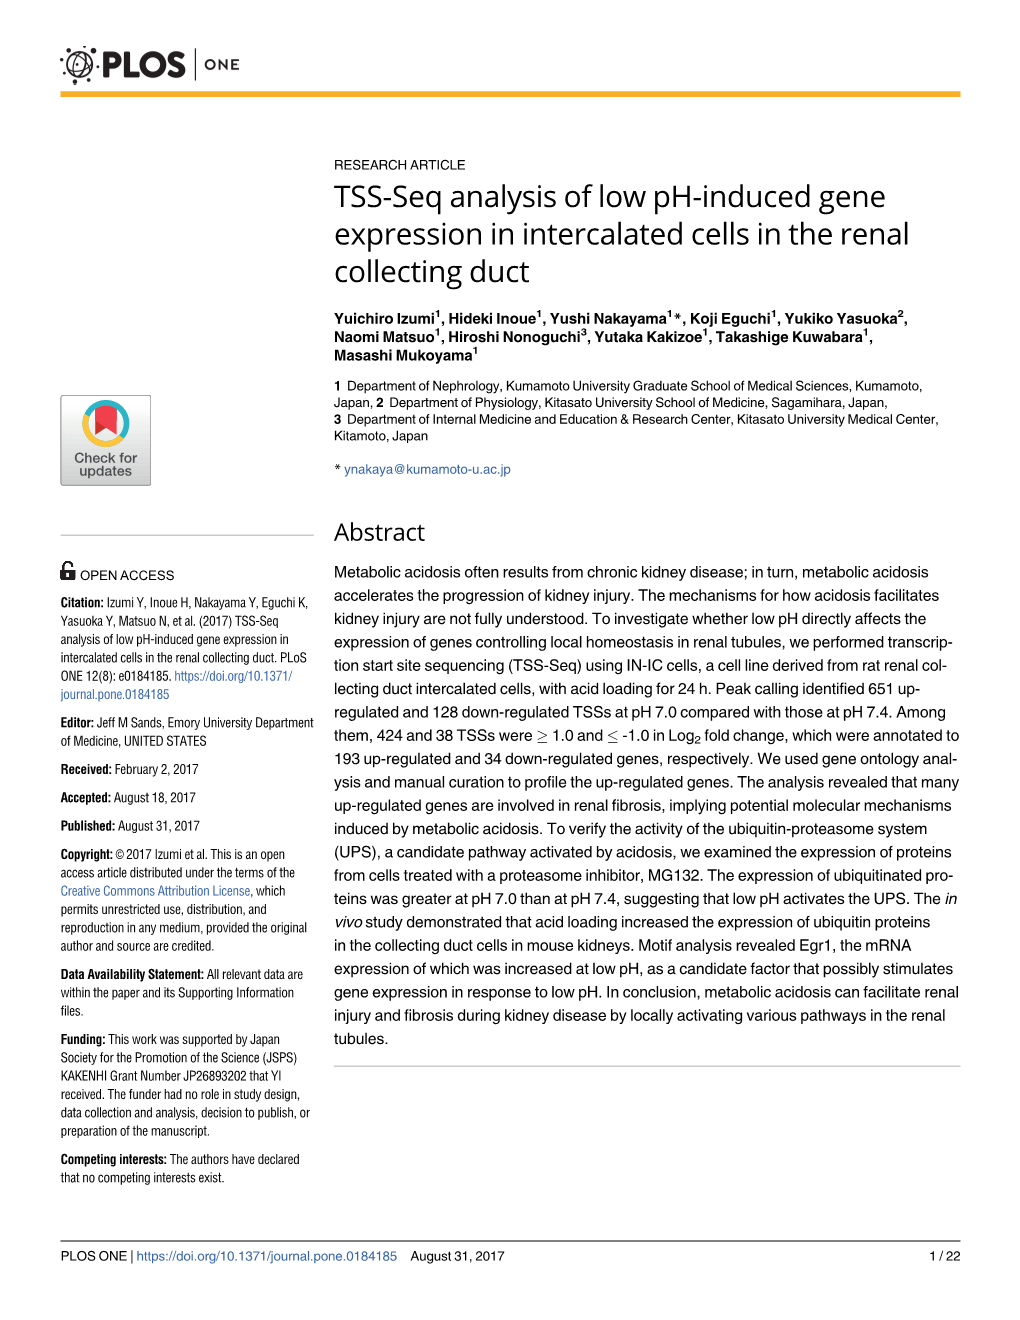 TSS-Seq Analysis of Low Ph-Induced Gene Expression in Intercalated Cells in the Renal Collecting Duct